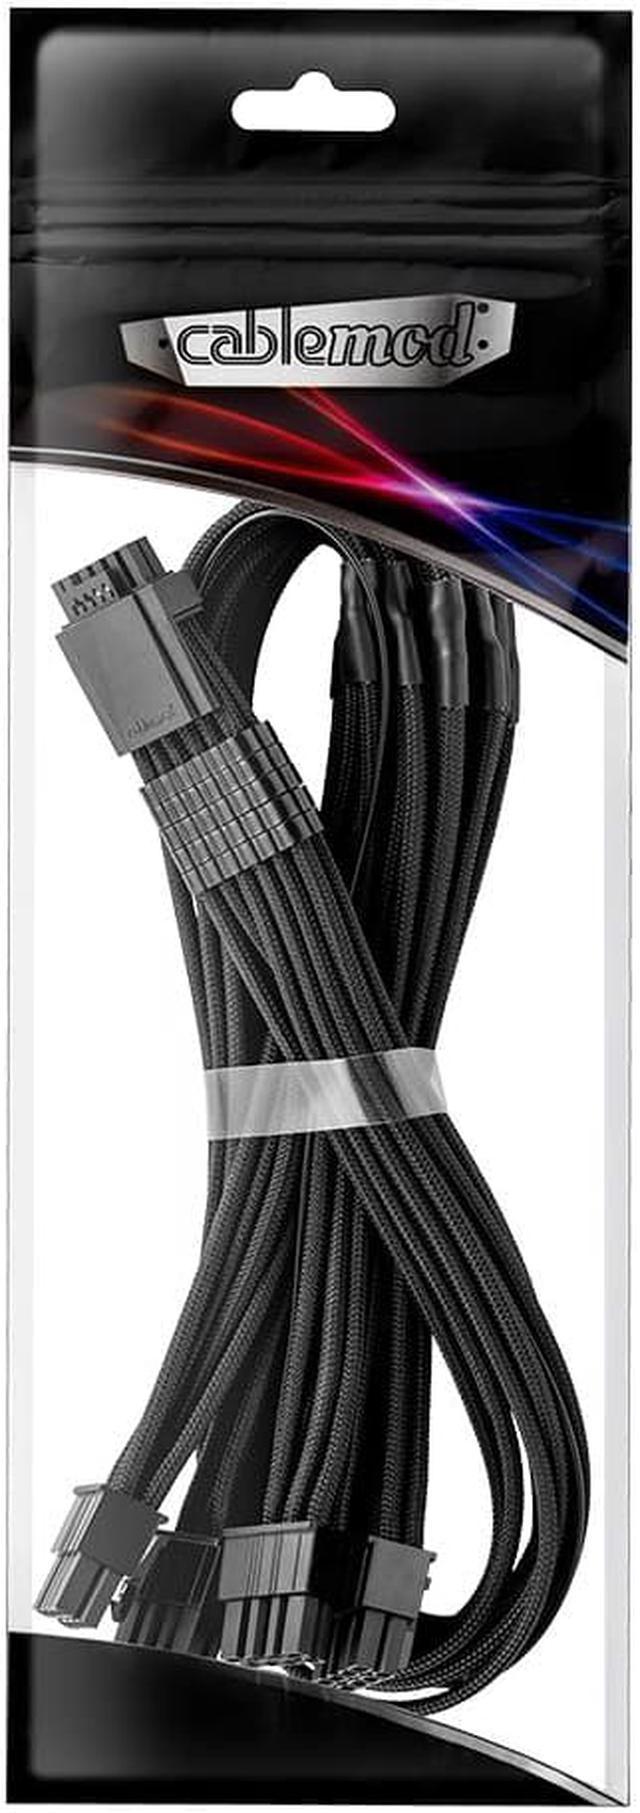 CableMod RT-Series Pro ModFlex Sleeved 12VHPWR PCI-e Cable for ASUS and  Seasonic - Newegg.com